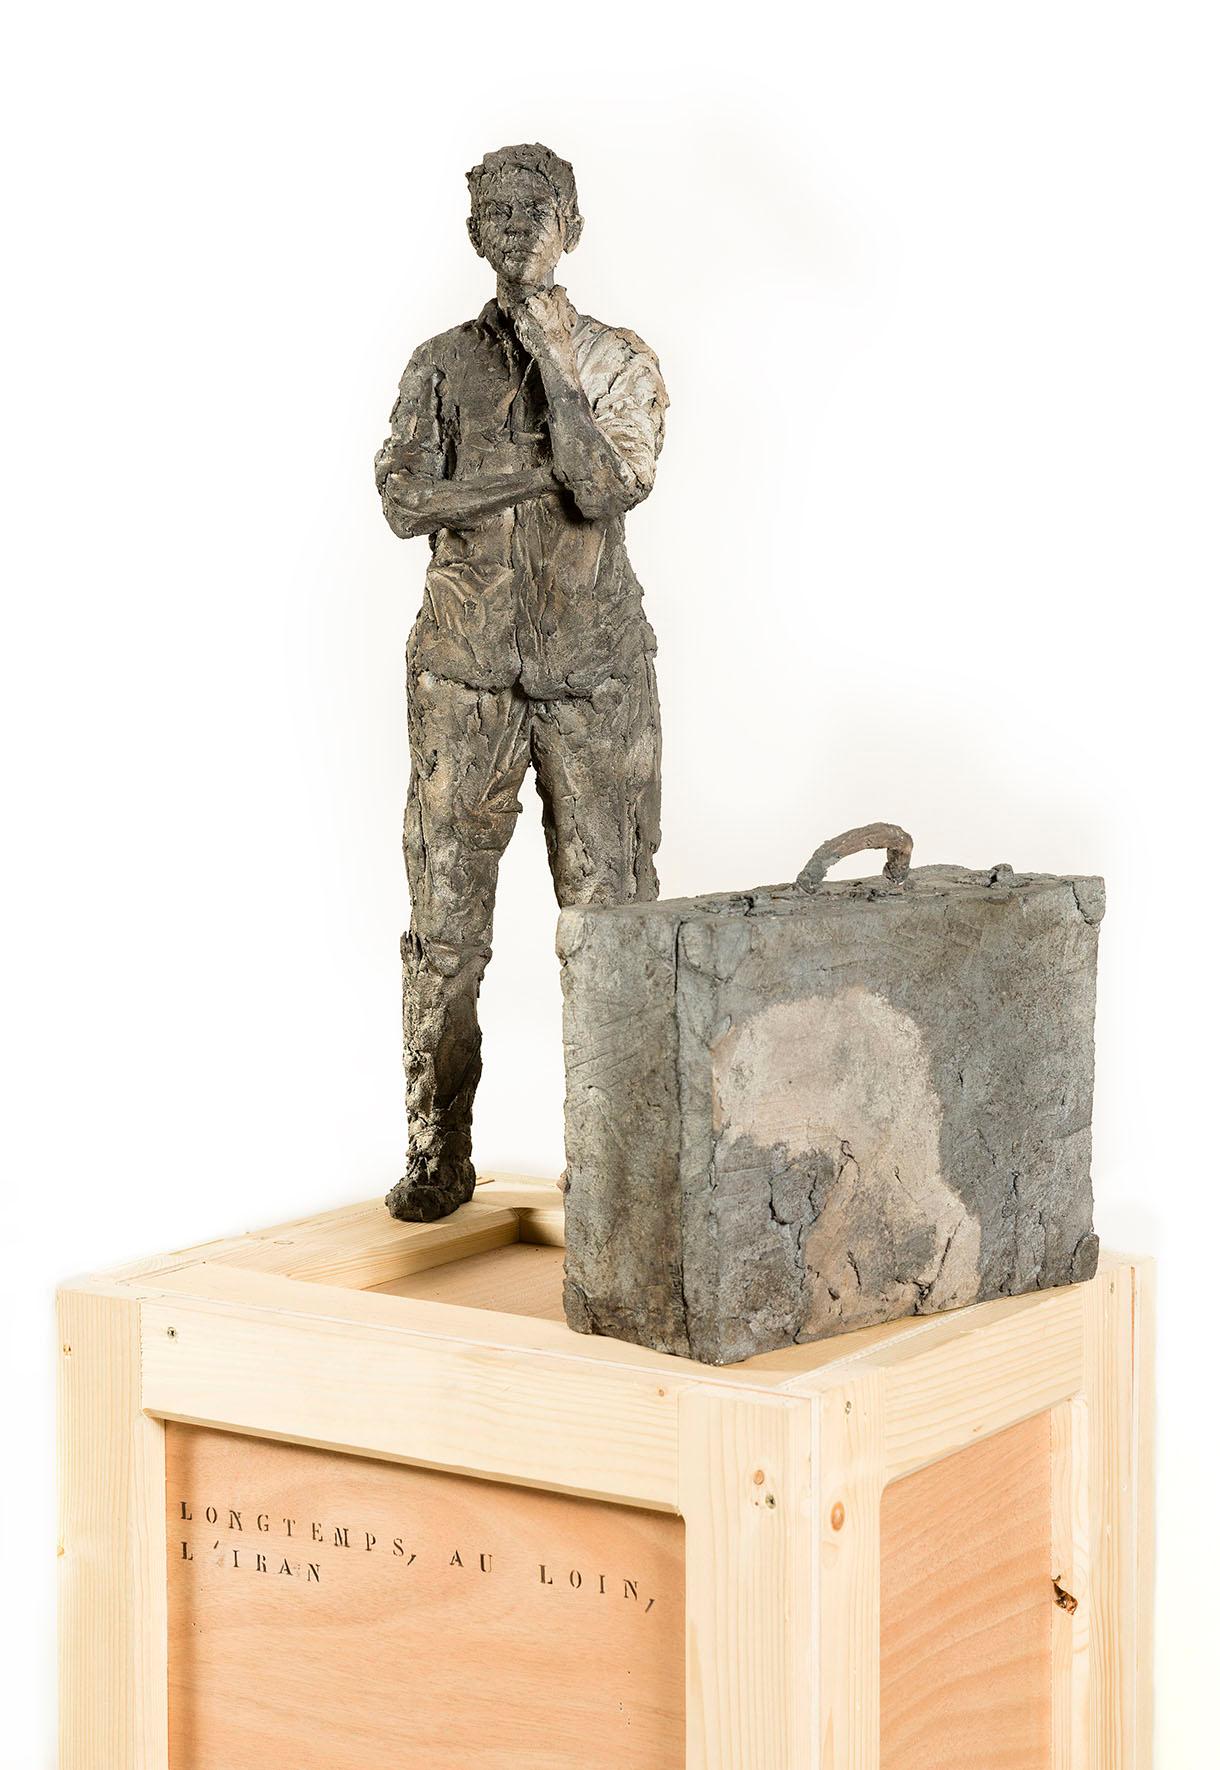 Longtemps, au loin, l’Iran (with Émilien) is a unique smoke-fired stoneware sculpture by French contemporary artist Cécile Raynal, dimensions are 160 × 52 × 45 cm (63 × 20.5 × 17.7 in). Dimensions include wooden base.
This sculpture is a unique